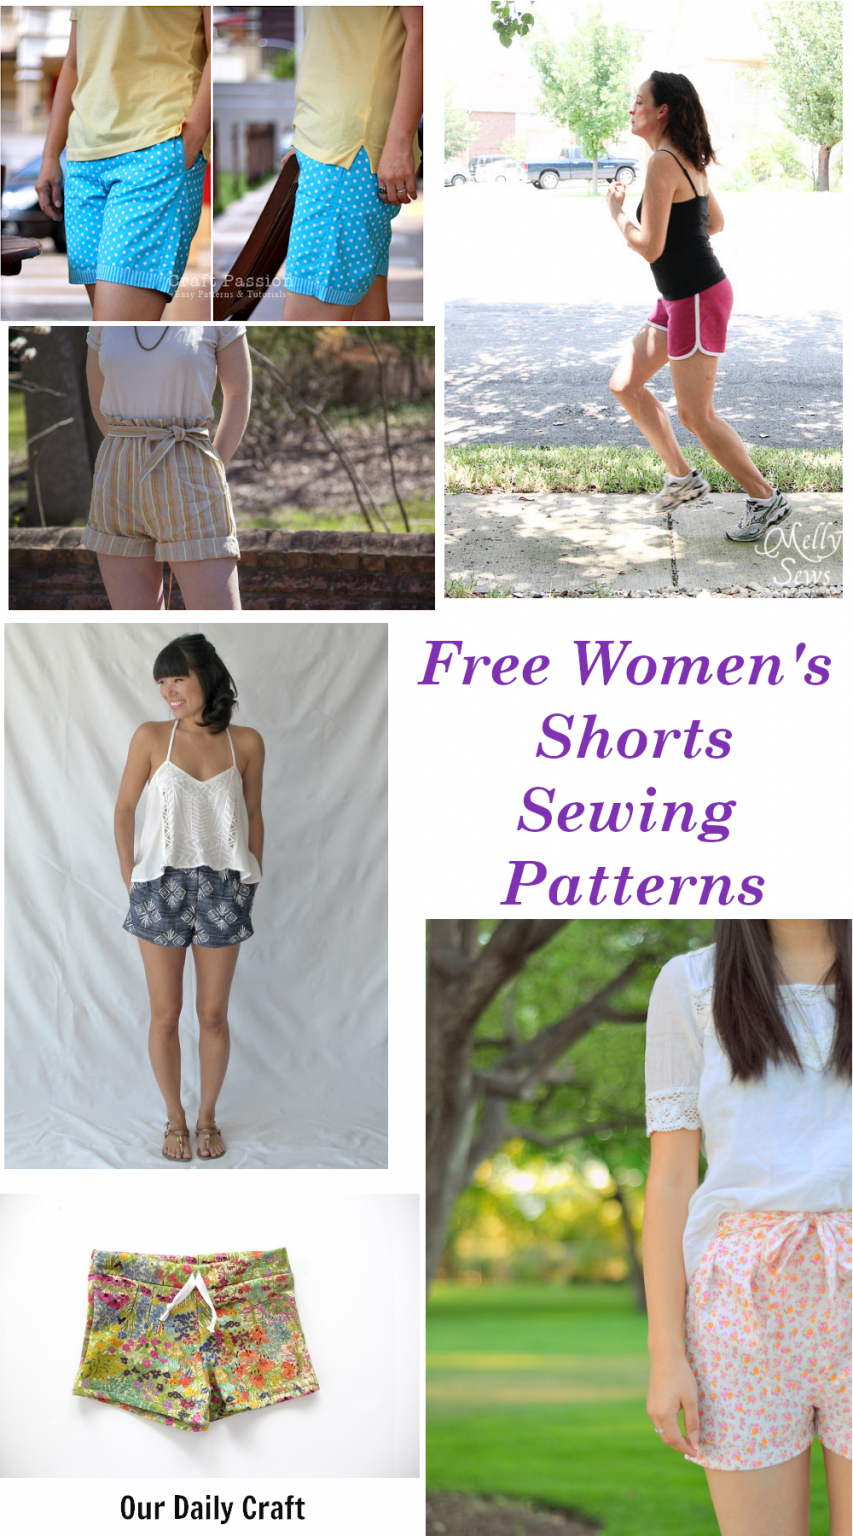 Free Women's Shorts Sewing Patterns - Our Daily Craft